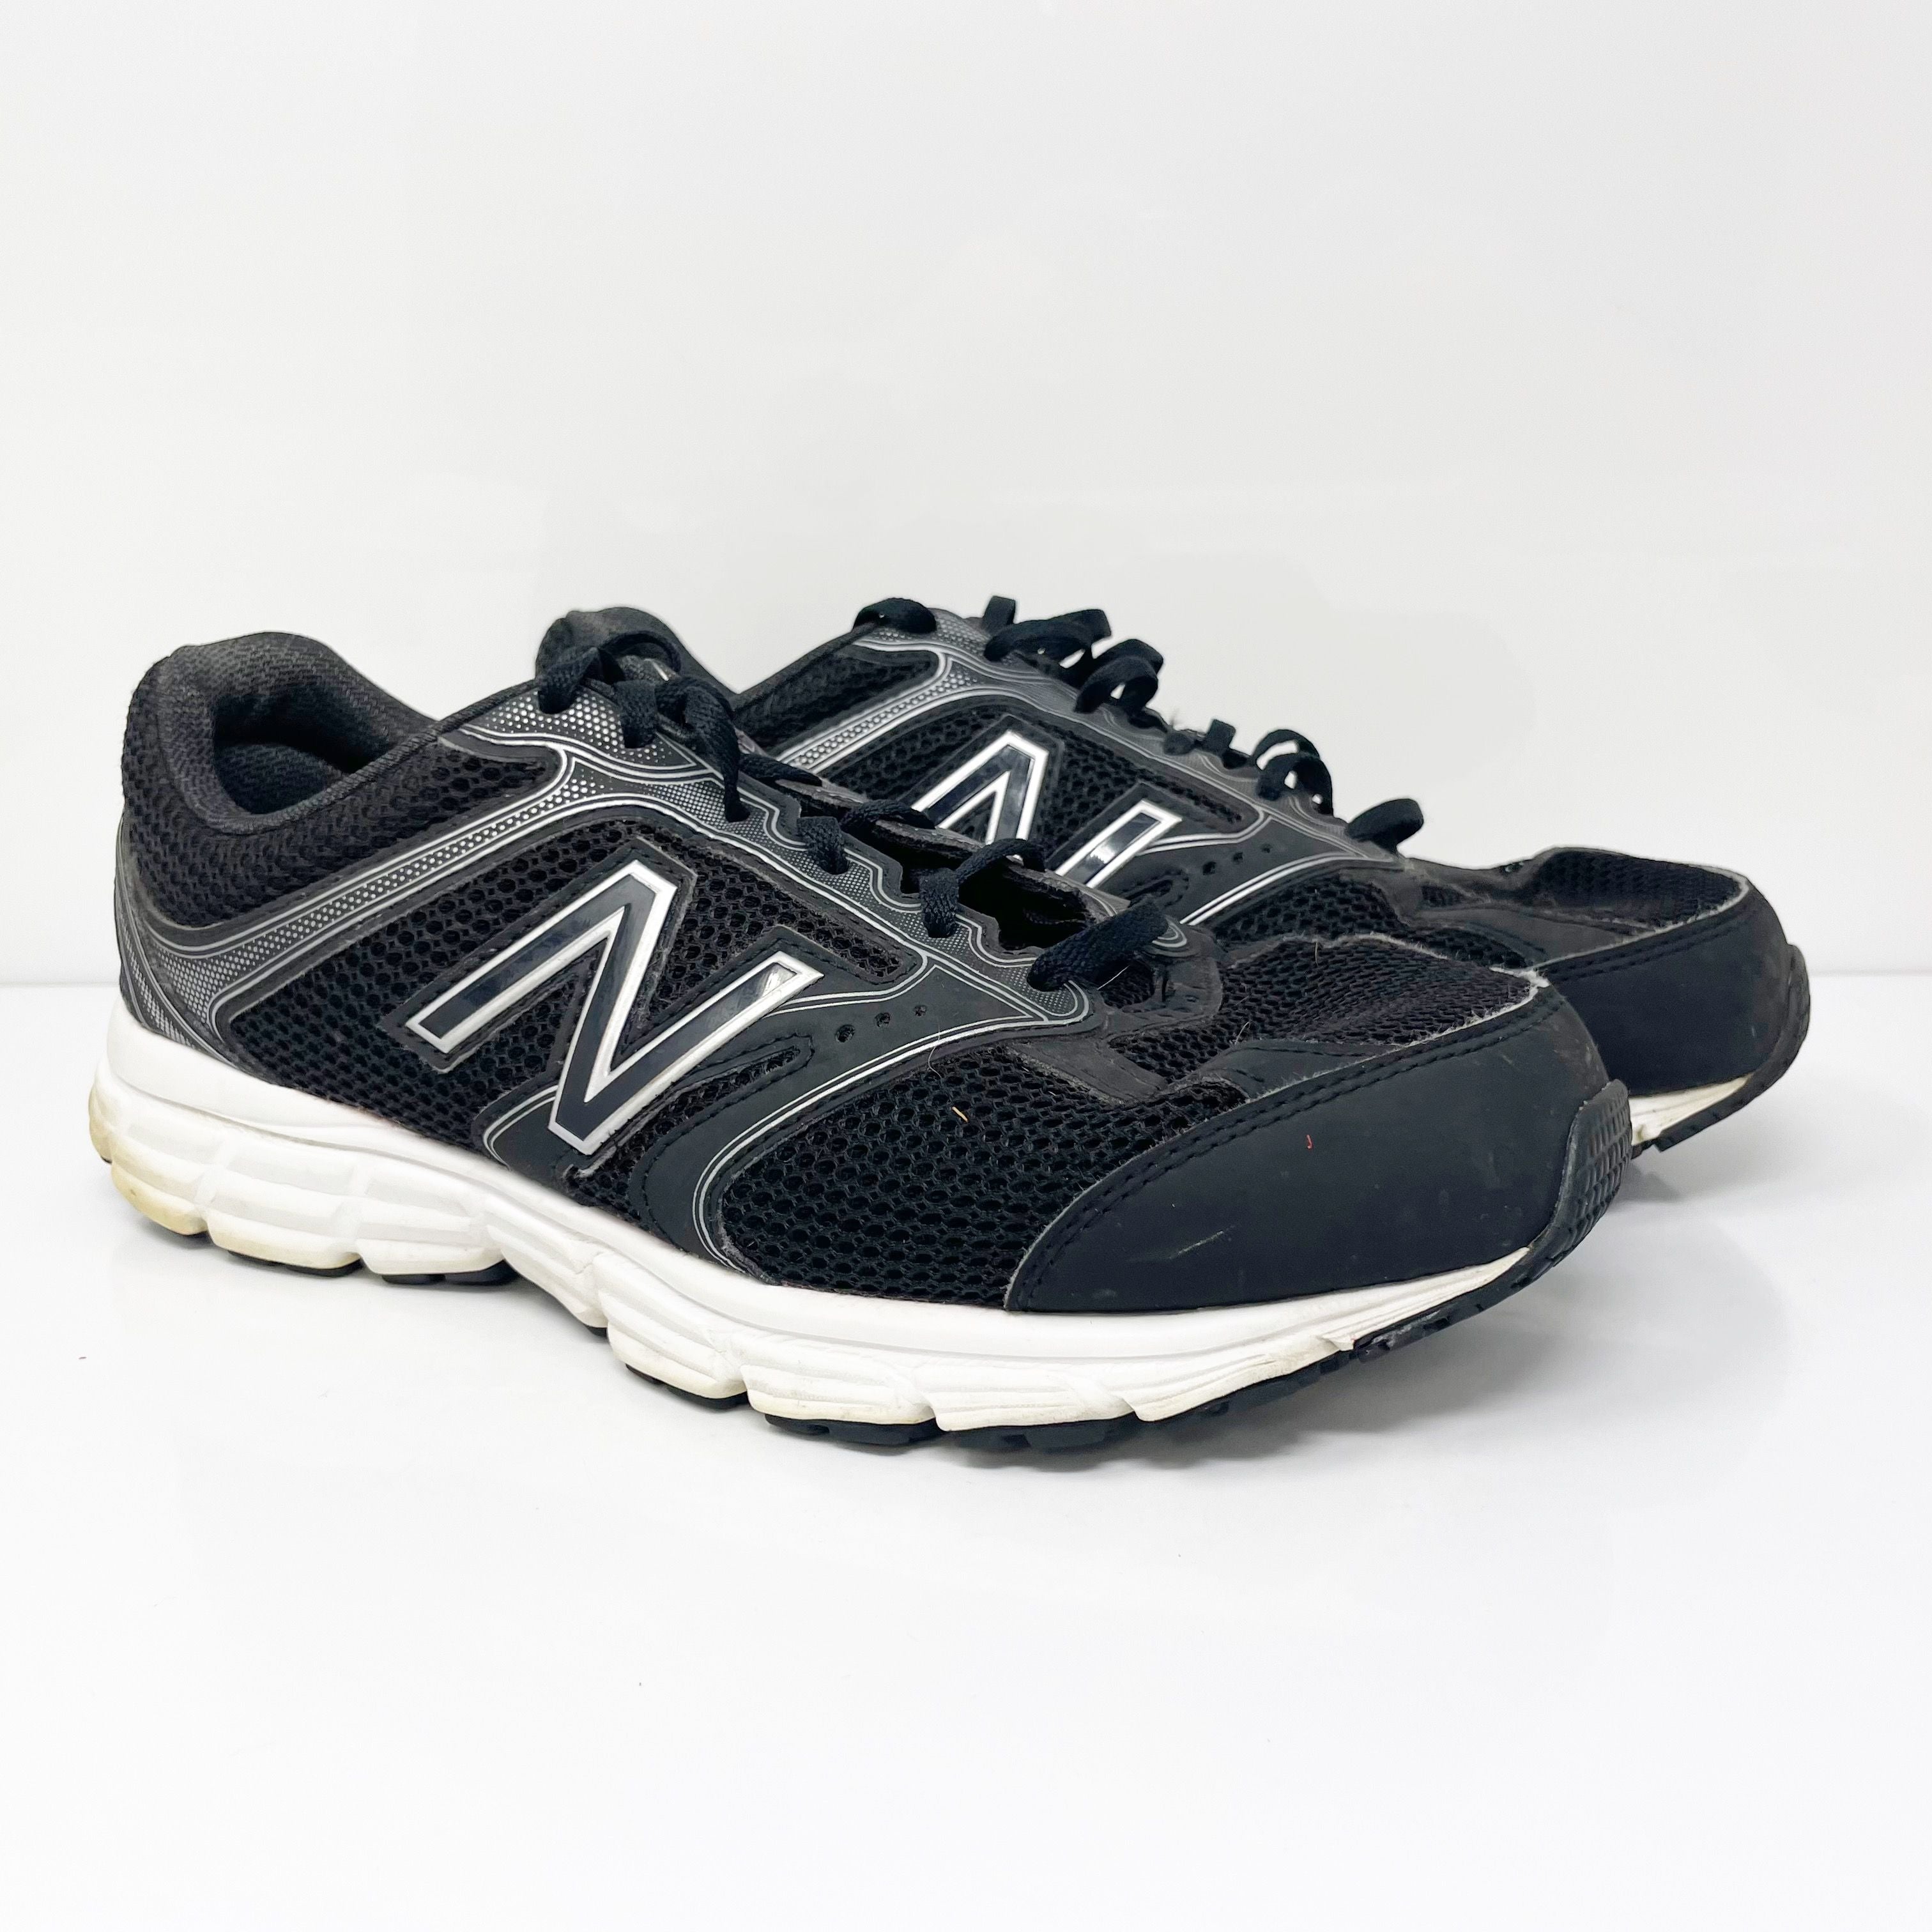 New Balance Mens 460 V2 M460LB2 Black Running Shoes Sneakers Size 9.5 ...